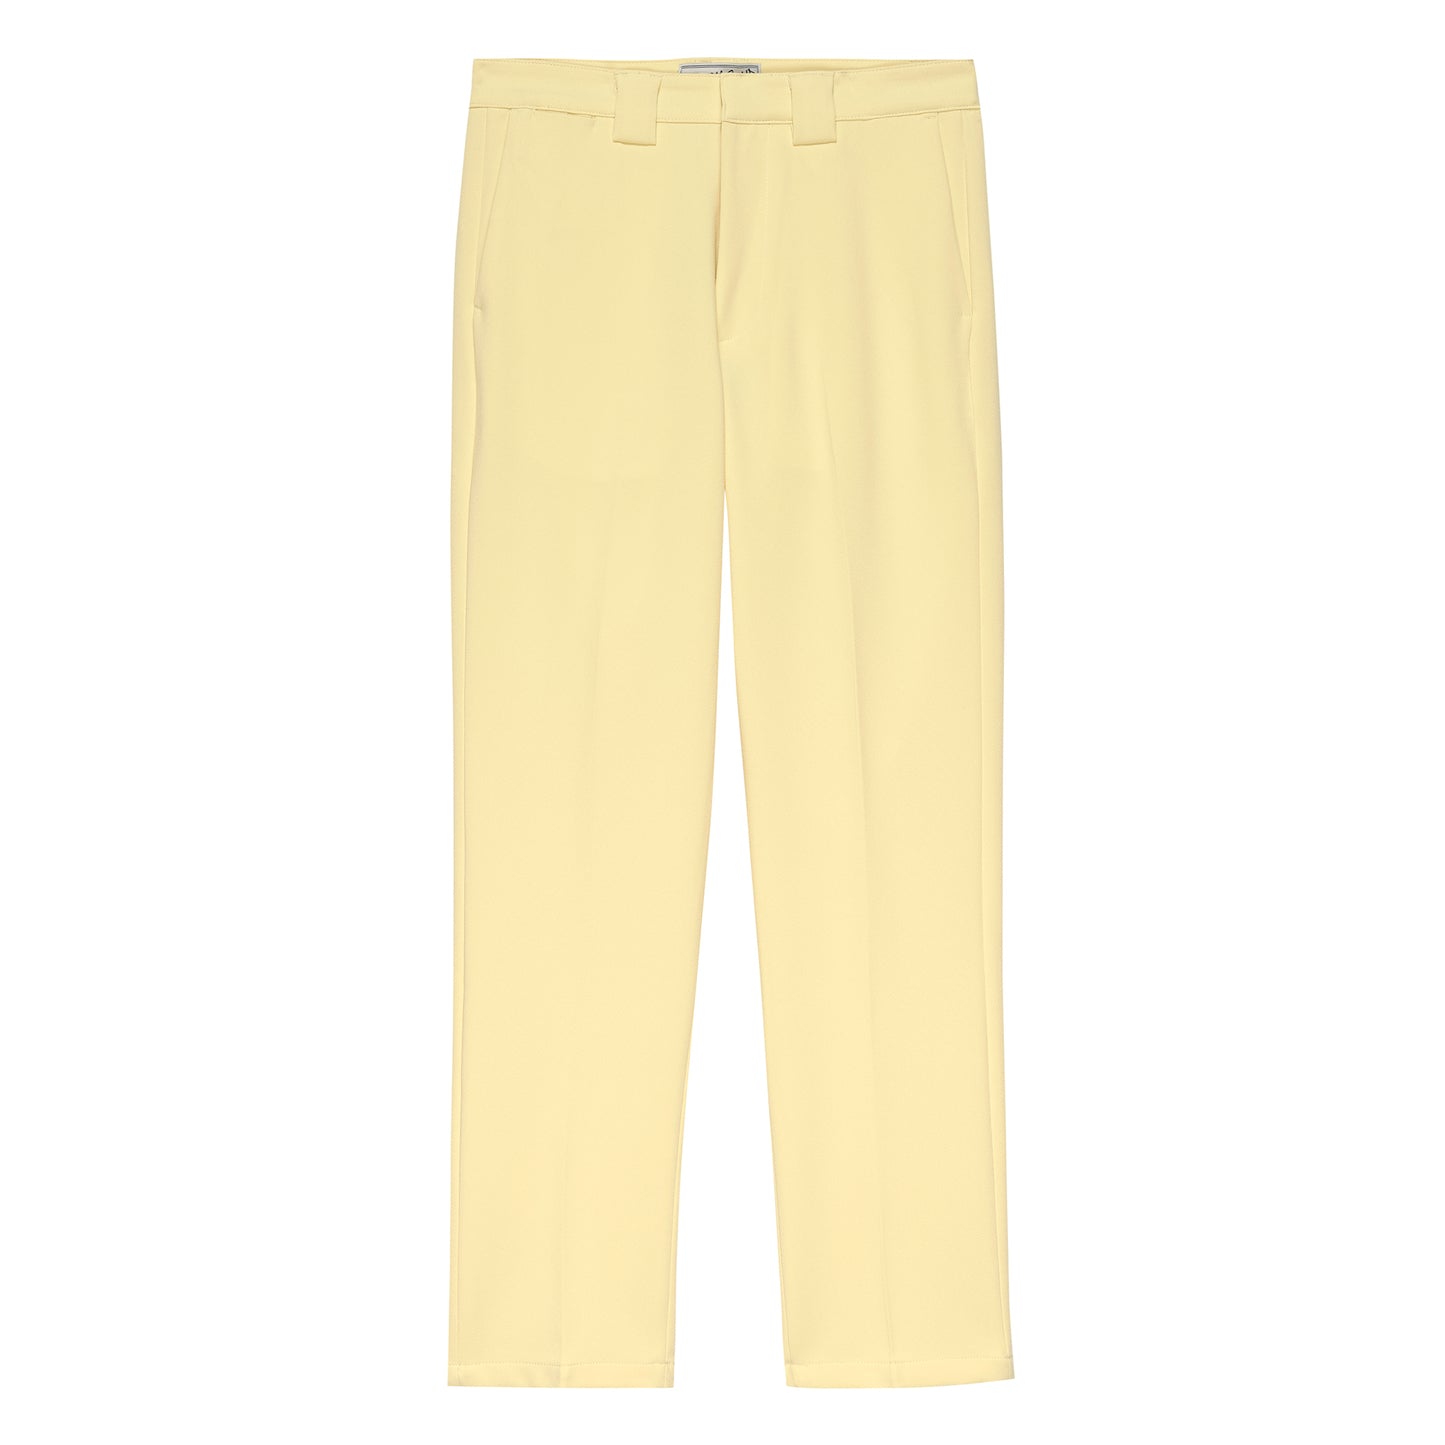 The Best Pant - Yellow